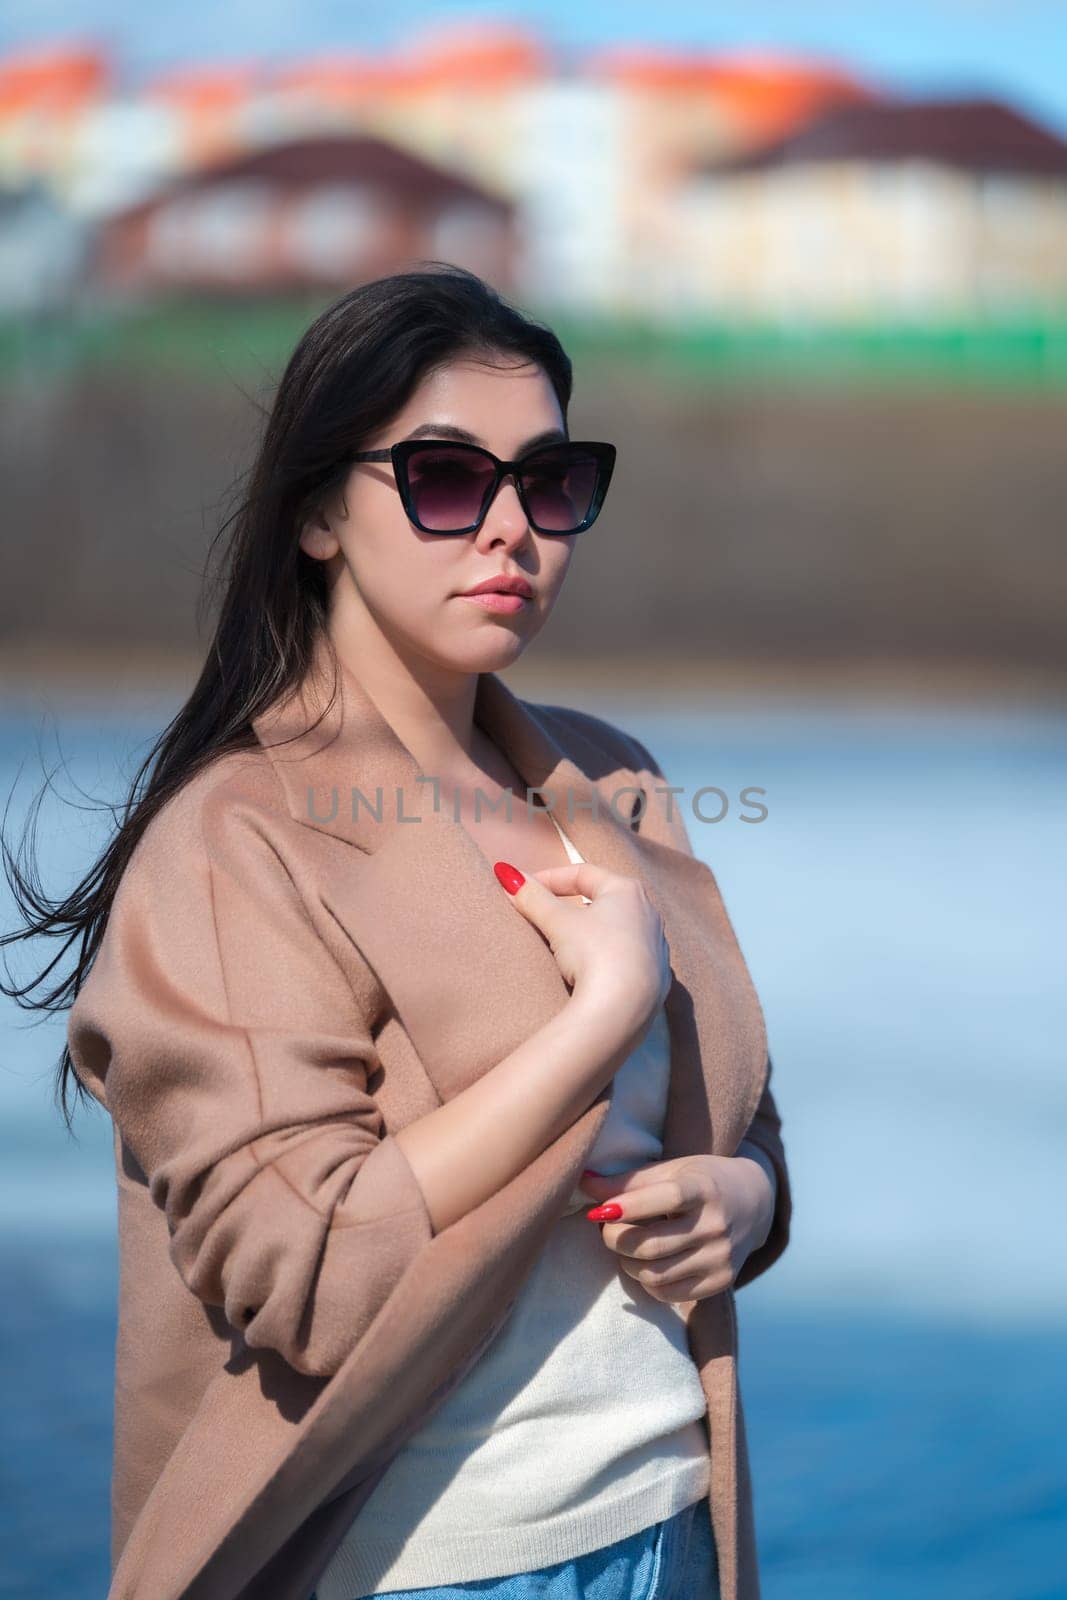 Portrait stylish young woman with long hair, plump lips and sunglasses, dressed in beige coat and white sweater posing outdoors against backdrop of blue lake and real estate standing in sunny weather.